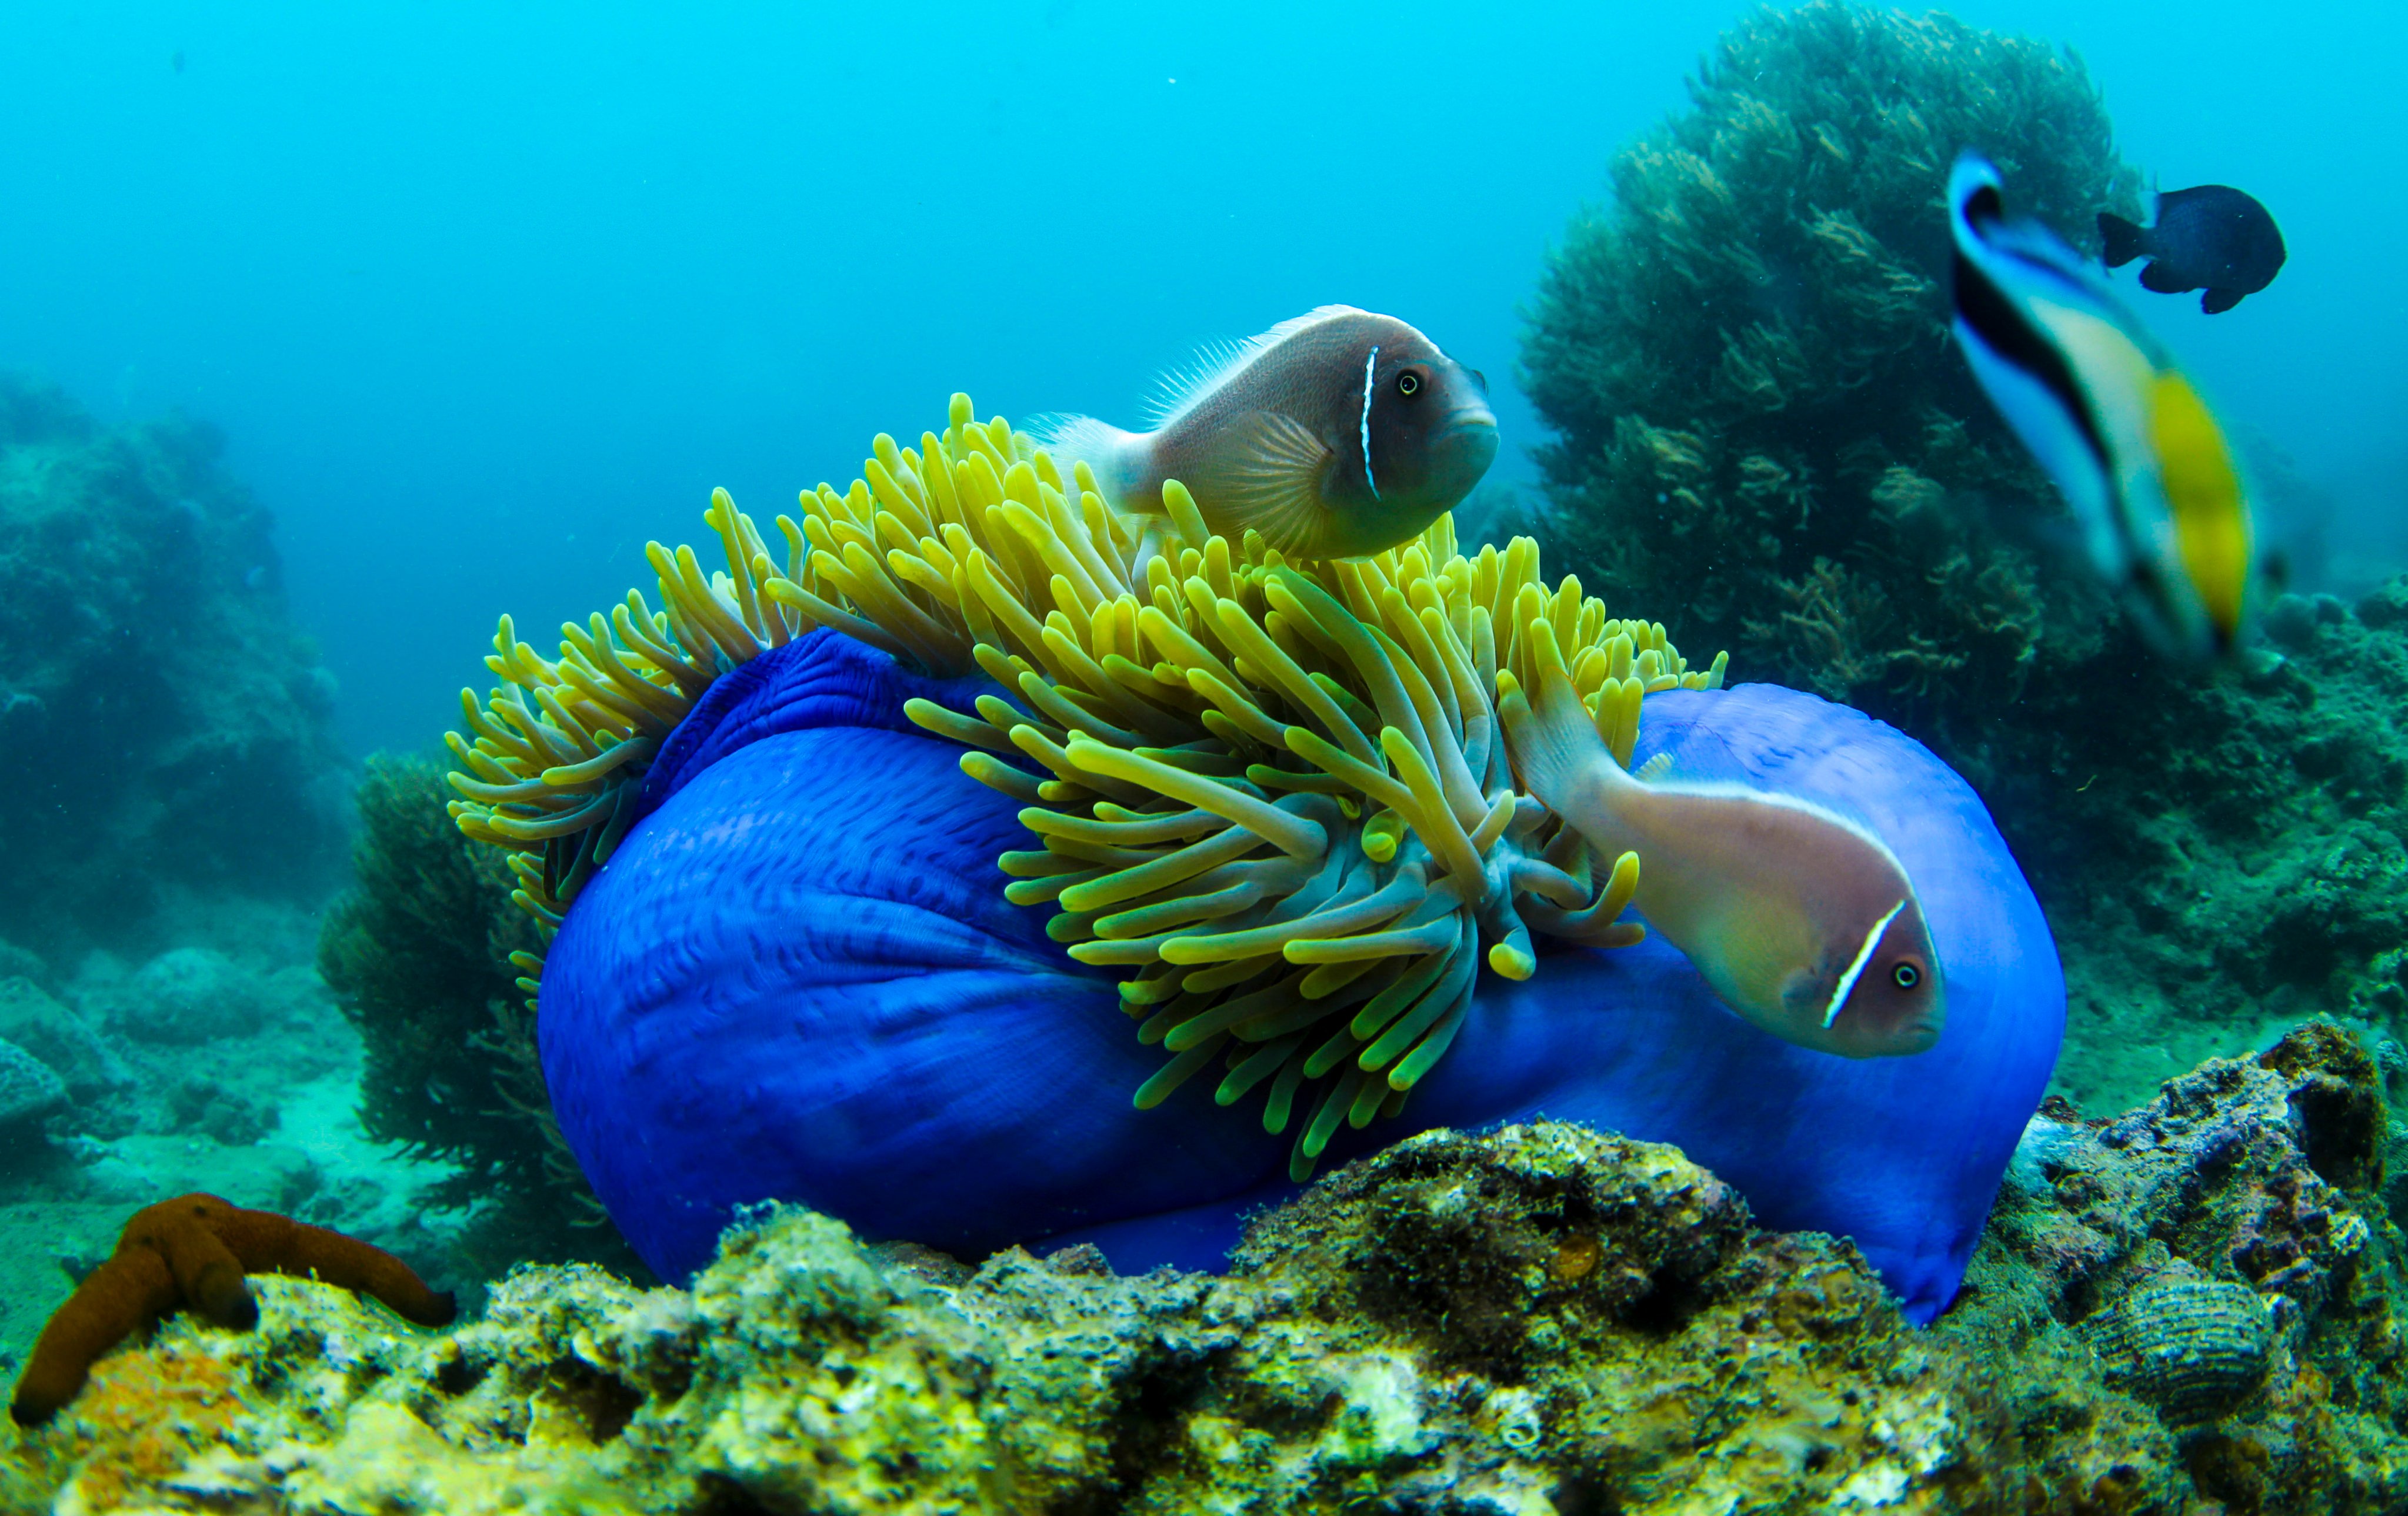 Fish and sea anemones at a marine ranch in the sea around Wuzhizhou Island in Sanya in south China’s Hainan province in June 2020. Around the world, countries are setting up marine protected areas as part of the fight against biodiversity loss. Xinhua: Yang Guanyu